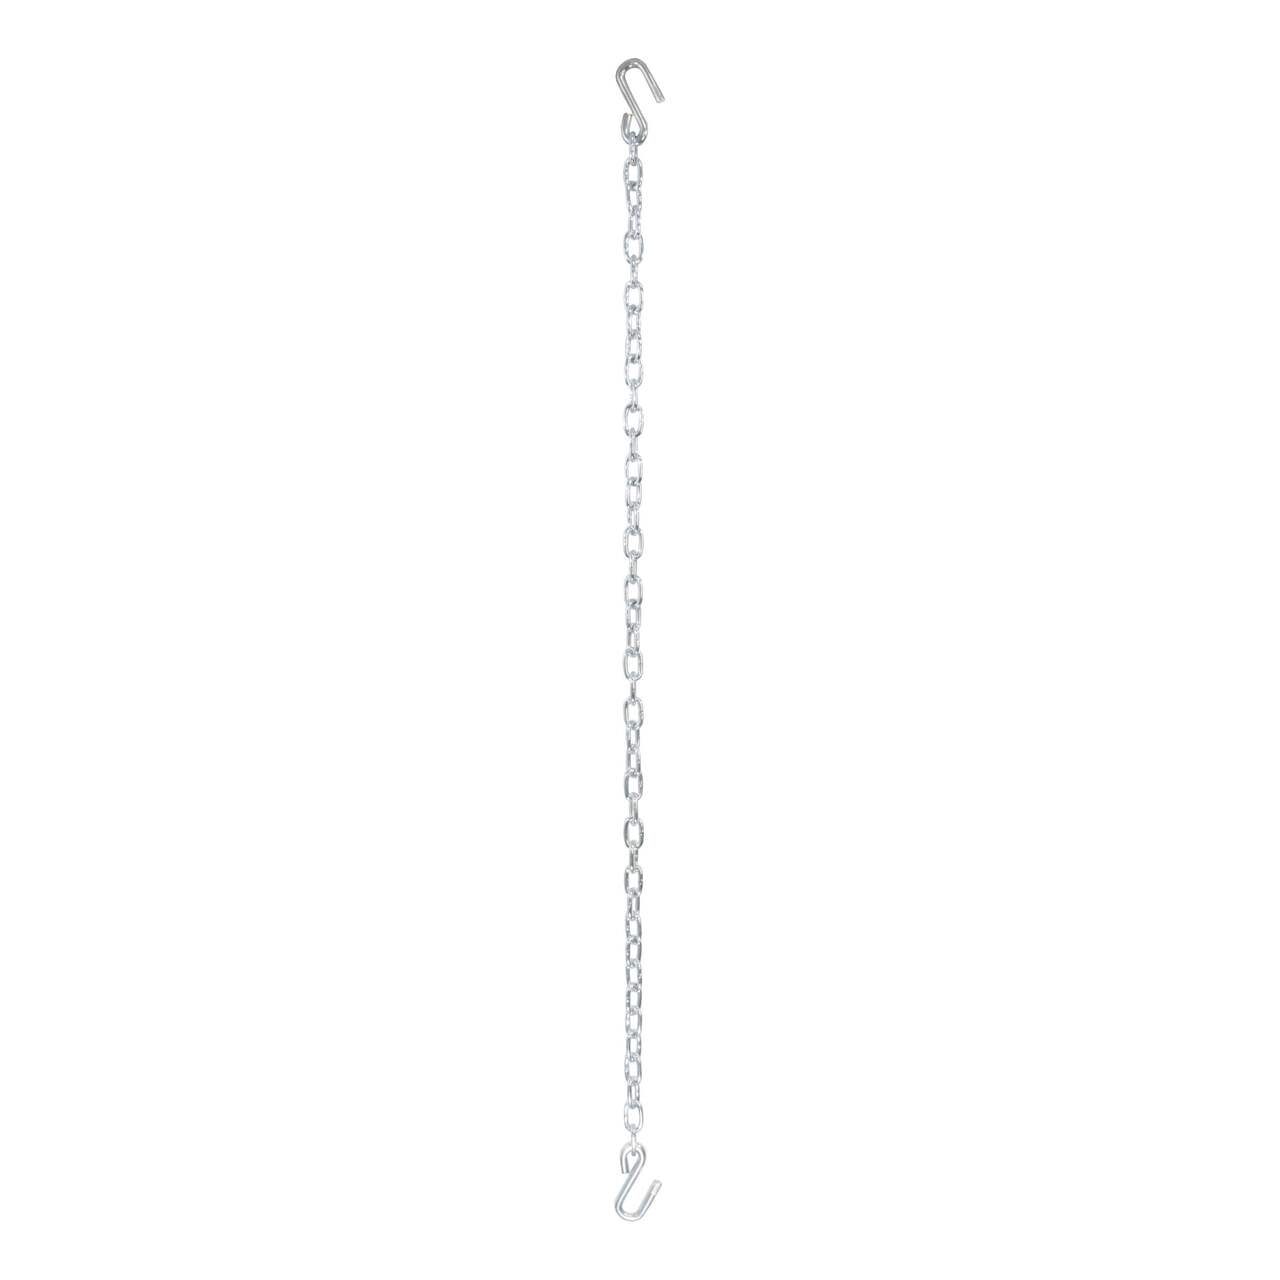 CURT Safety Chain with S-Hooks, 48-in